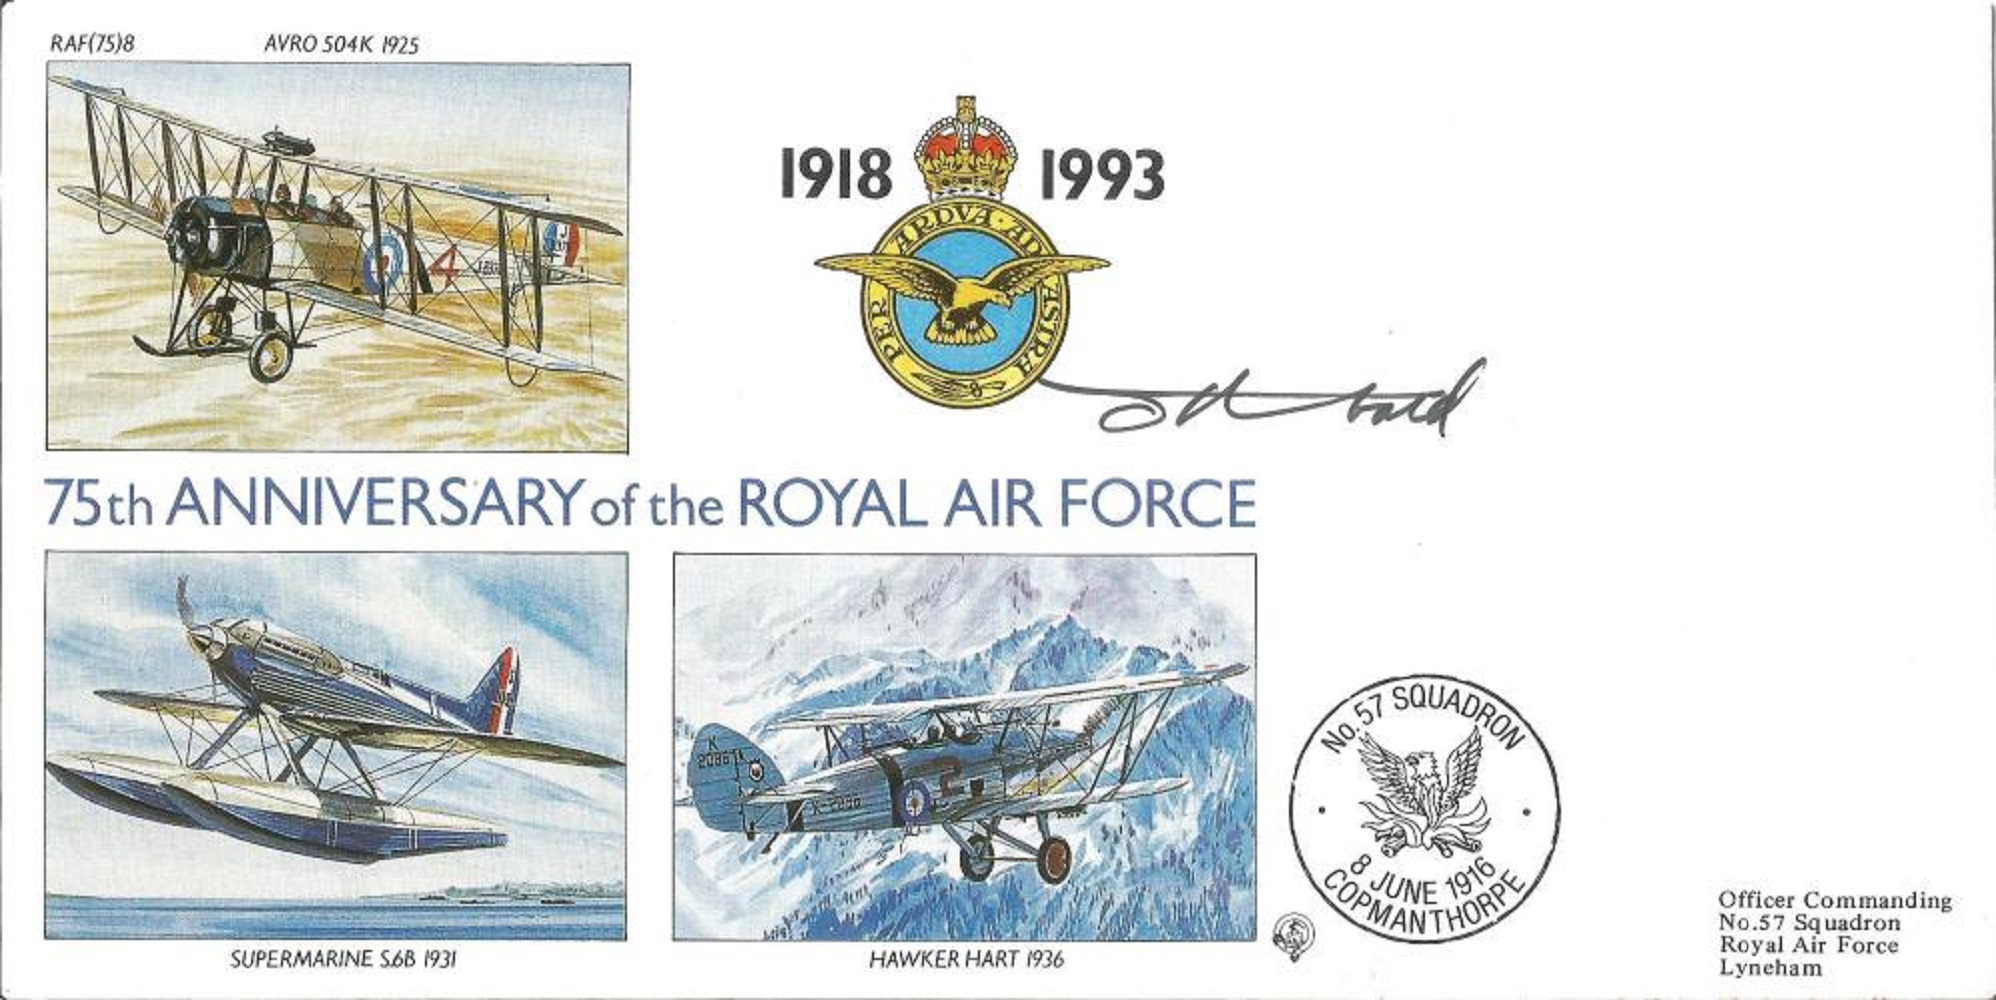 Tony Theobald cover artist signed 75th ann RAF cover. A. Good condition. All autographs come with